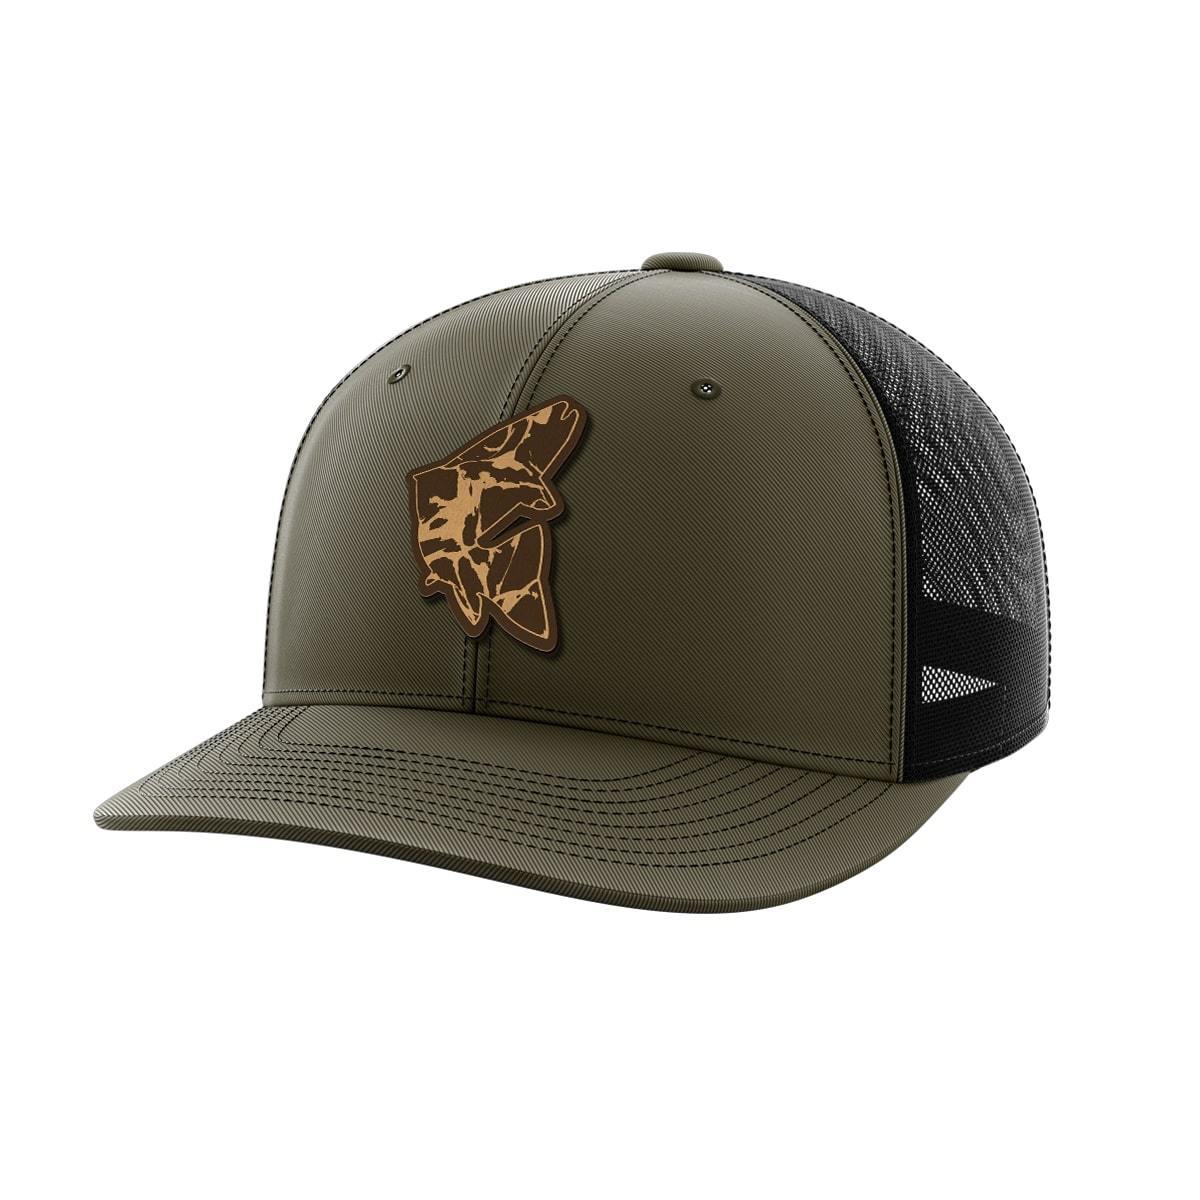 Fish Leather Patch Hat - Greater Half